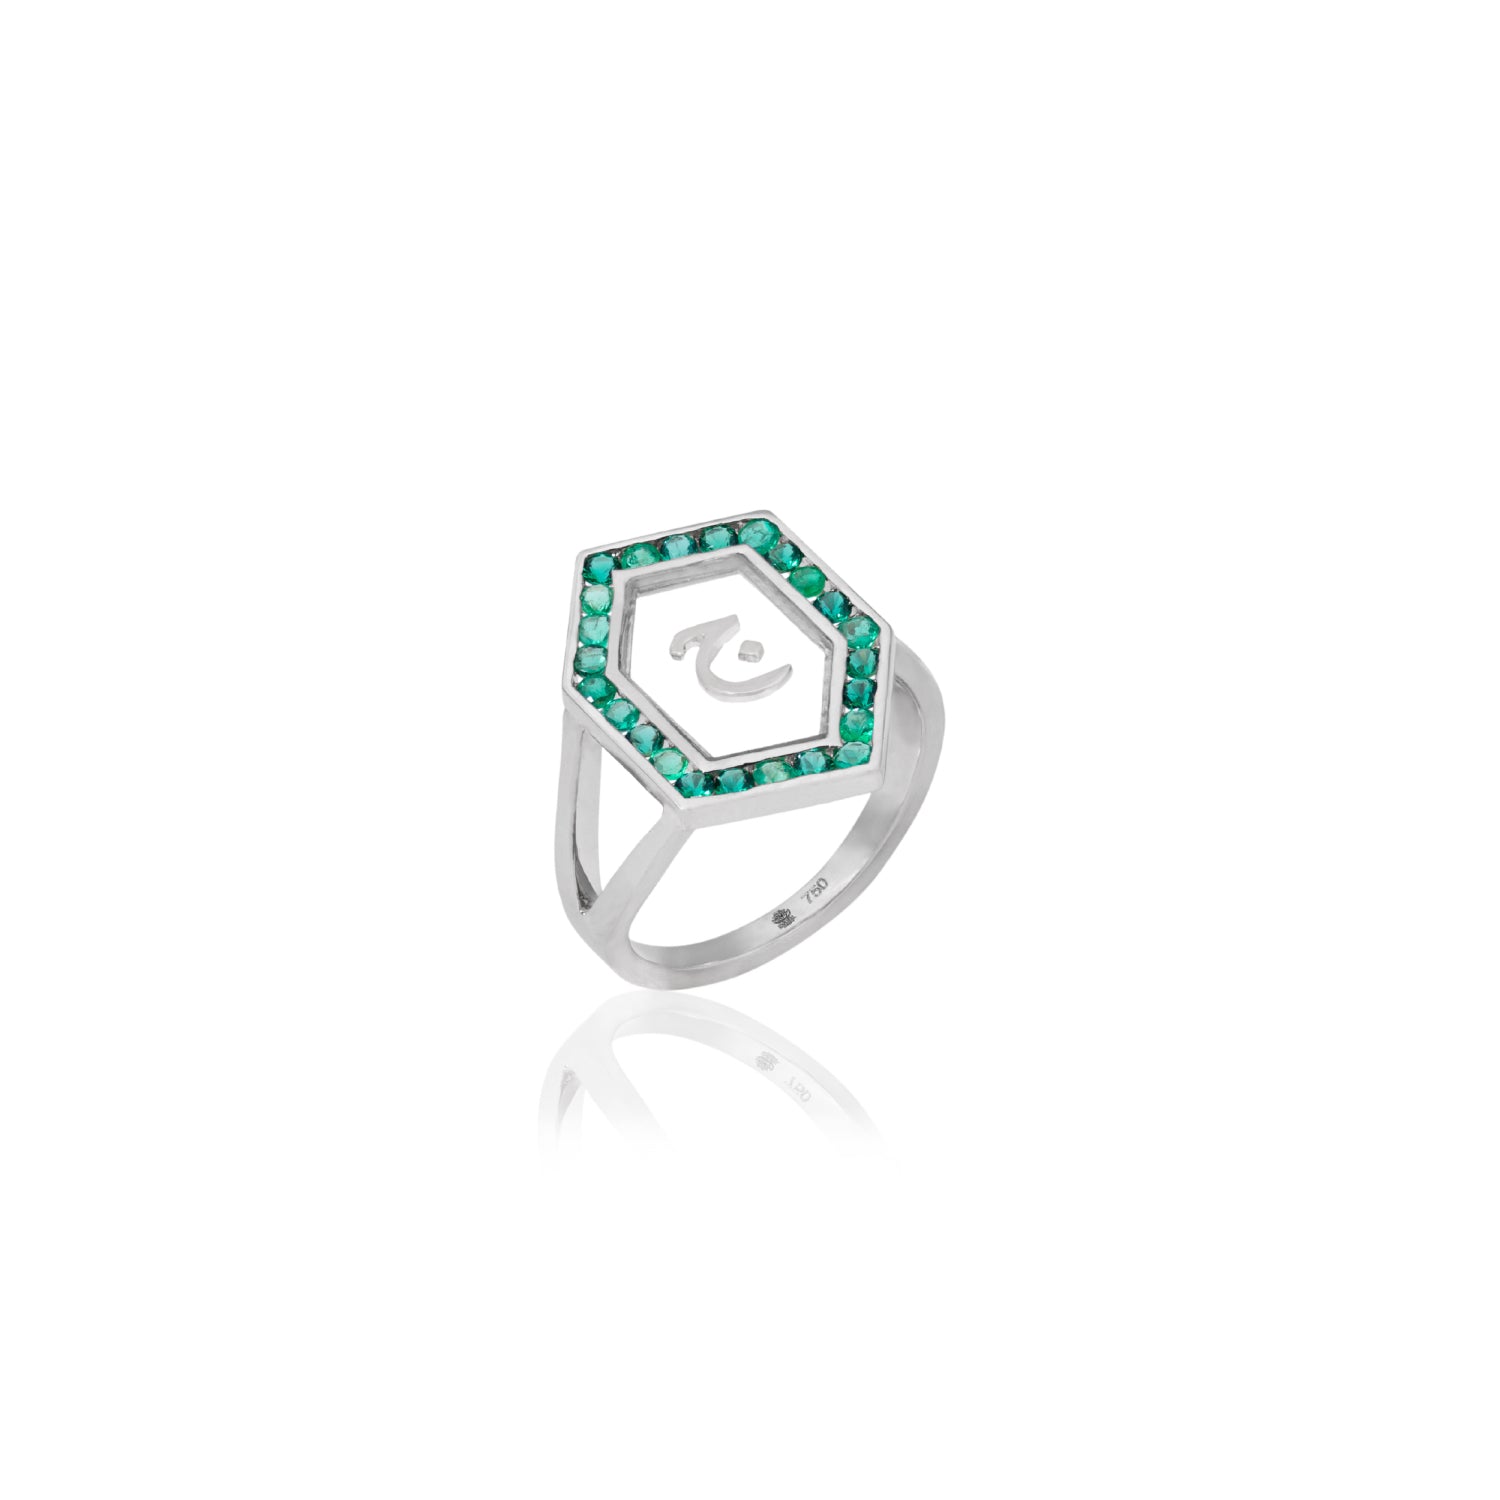 Qamoos 1.0 Letter ج Emerald Ring in White Gold